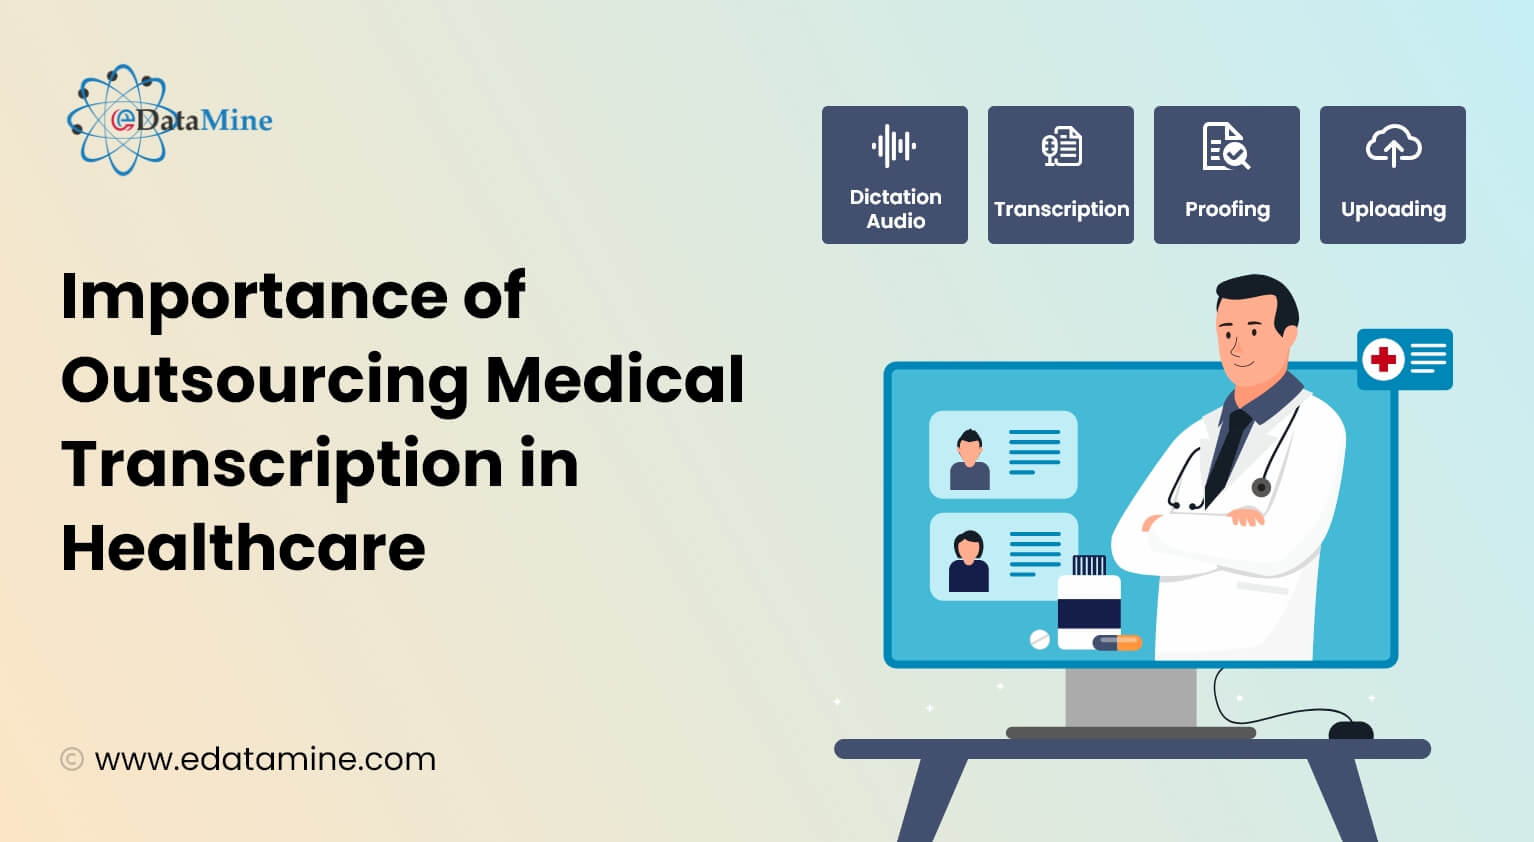 Importance of Outsourcing Medical Transcription in Healthcare